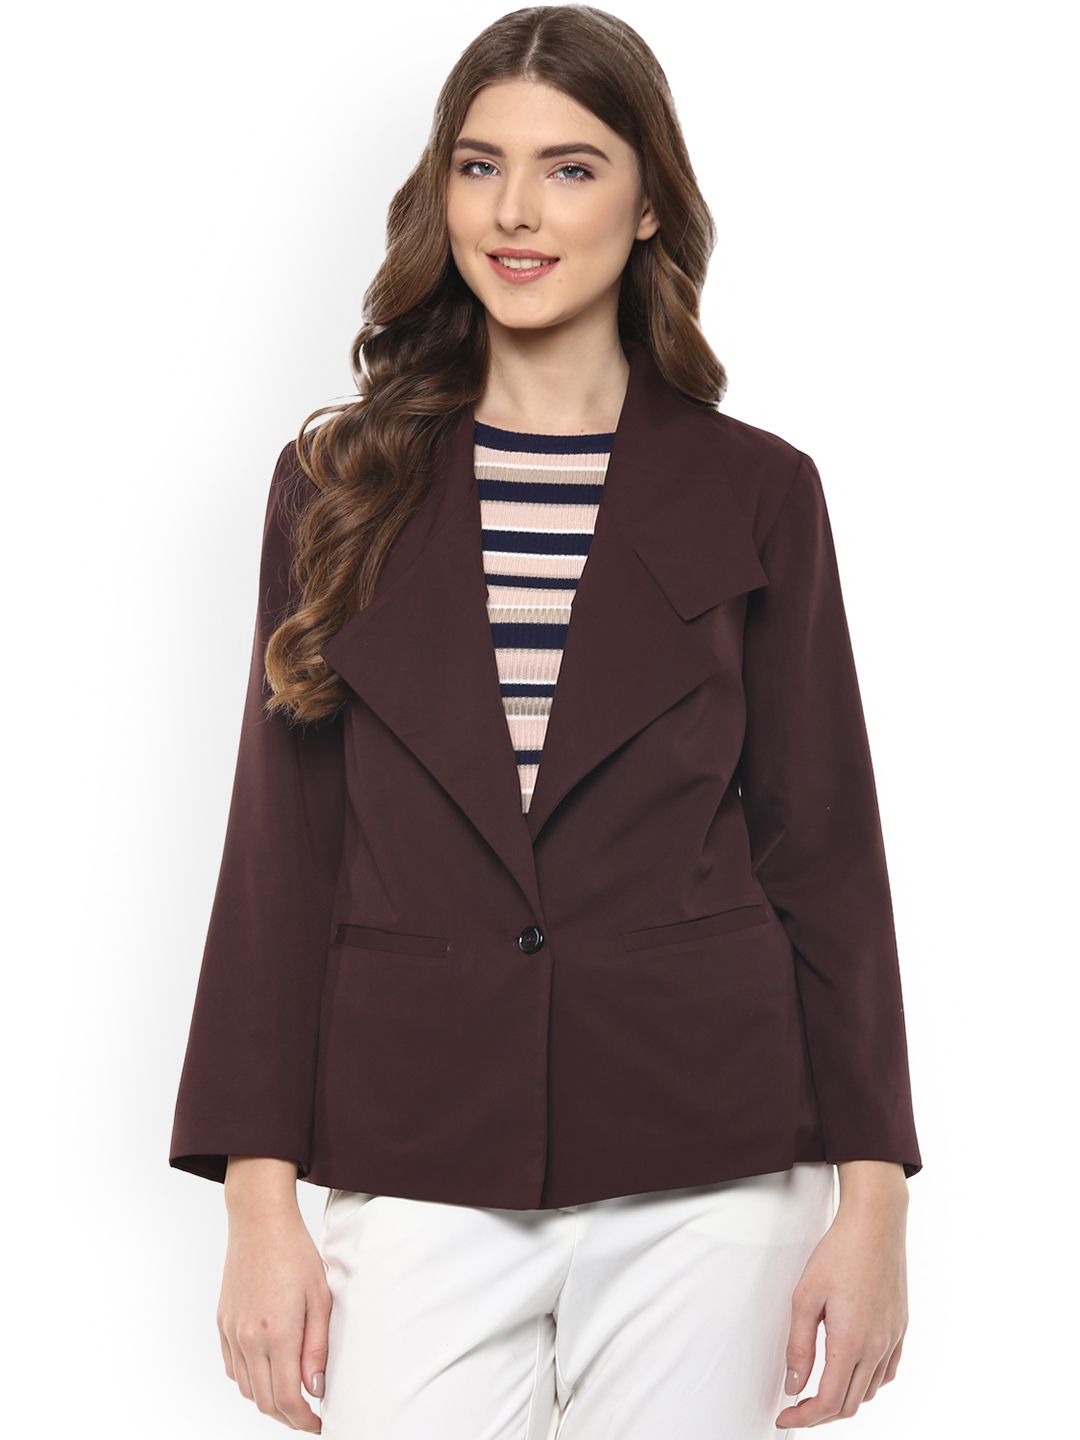 MABISH Woman Brown Slim Fit Solid Single-Breasted Smart-Casual Blazer Price in India